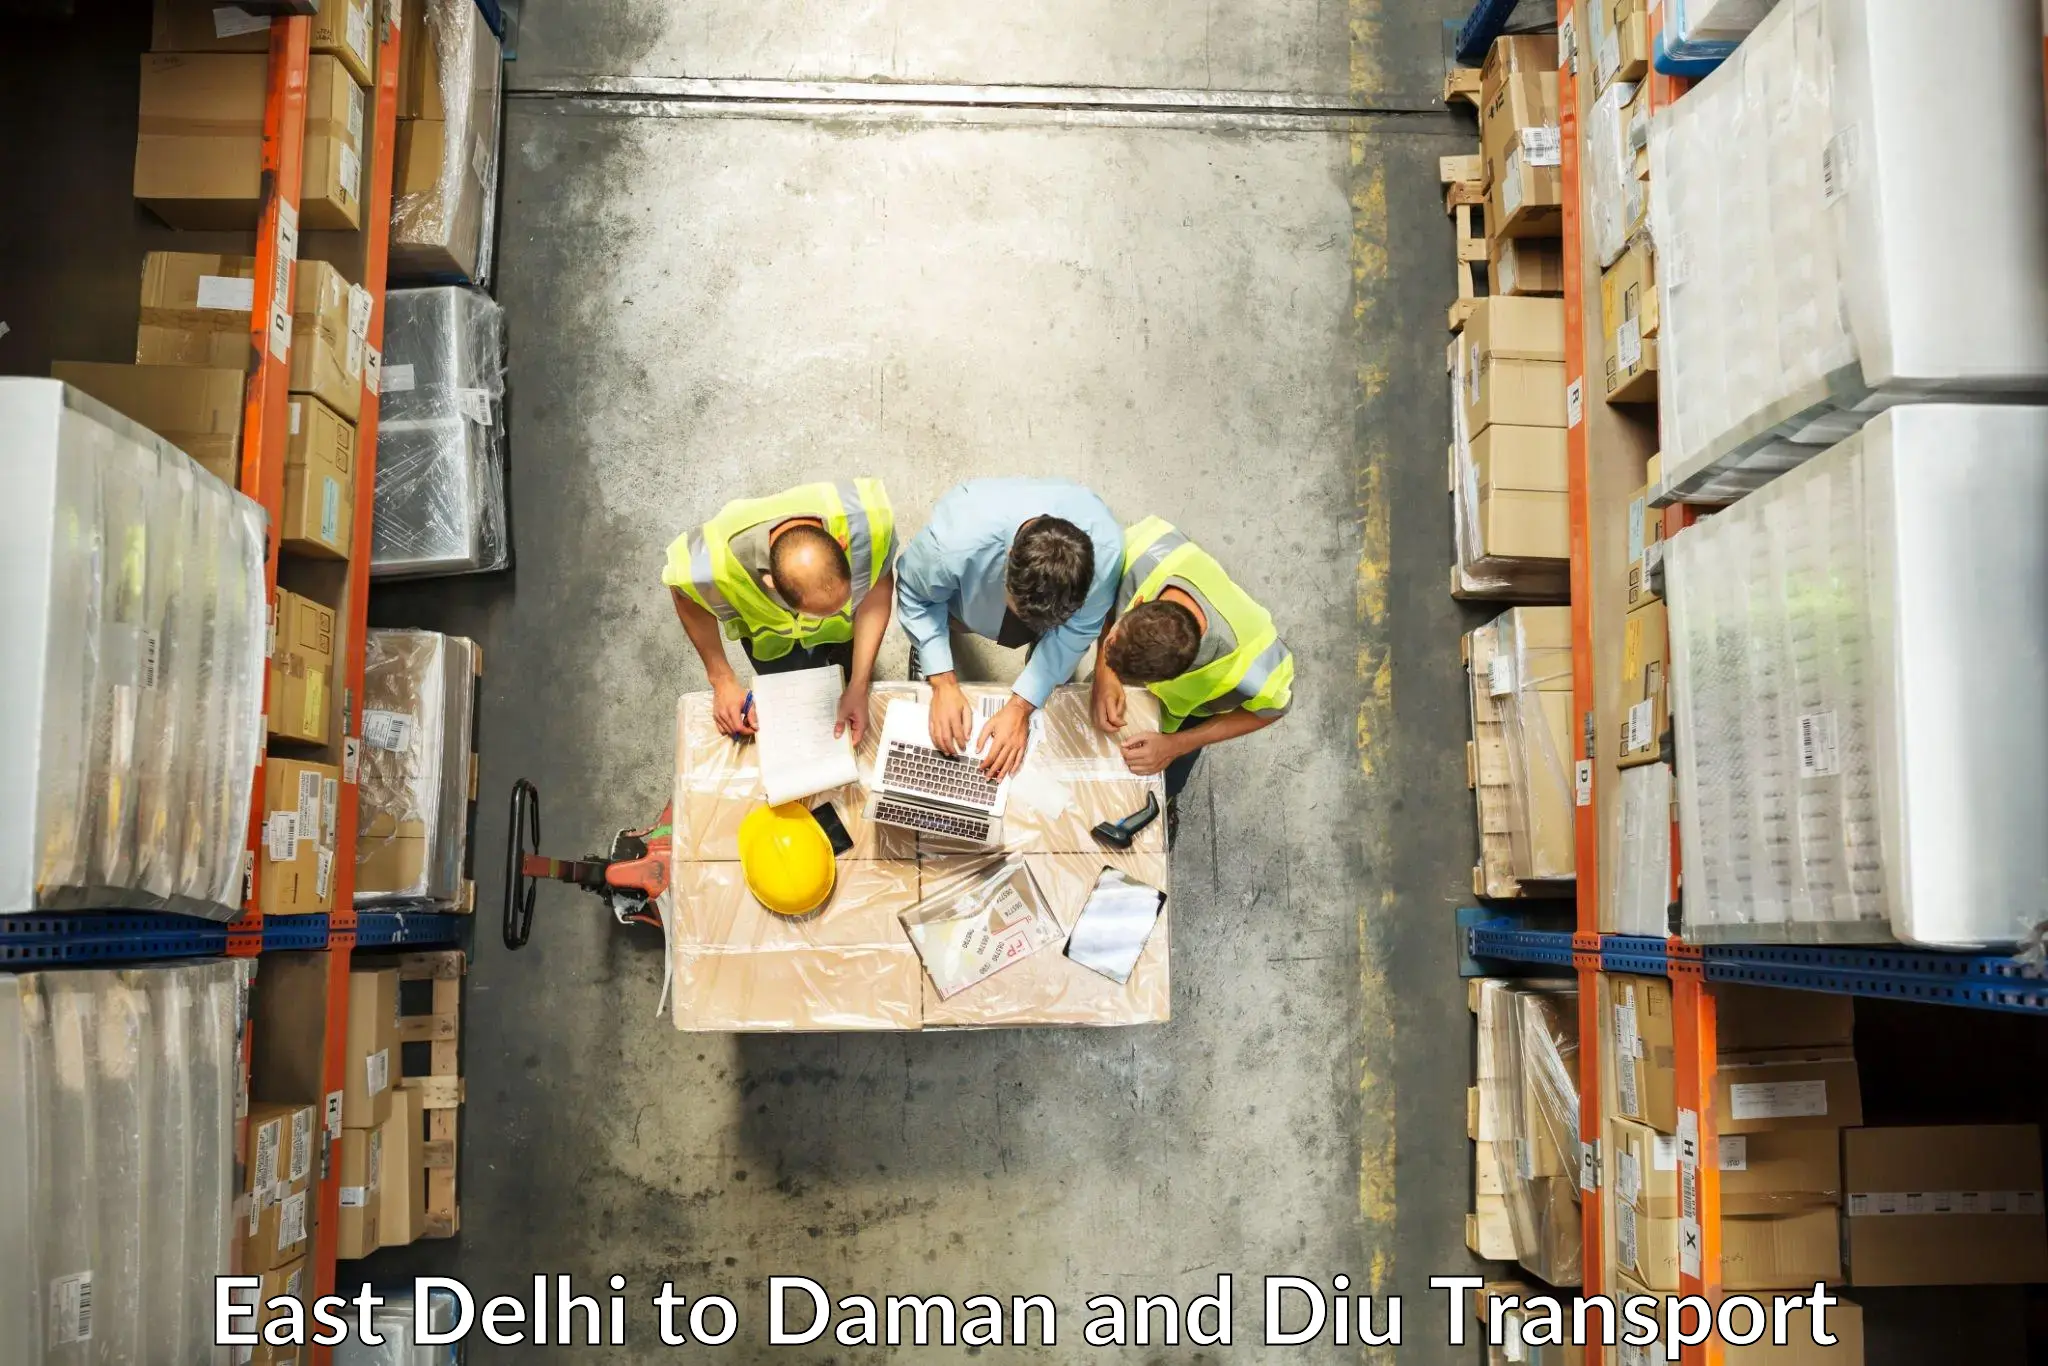 Part load transport service in India East Delhi to Daman and Diu